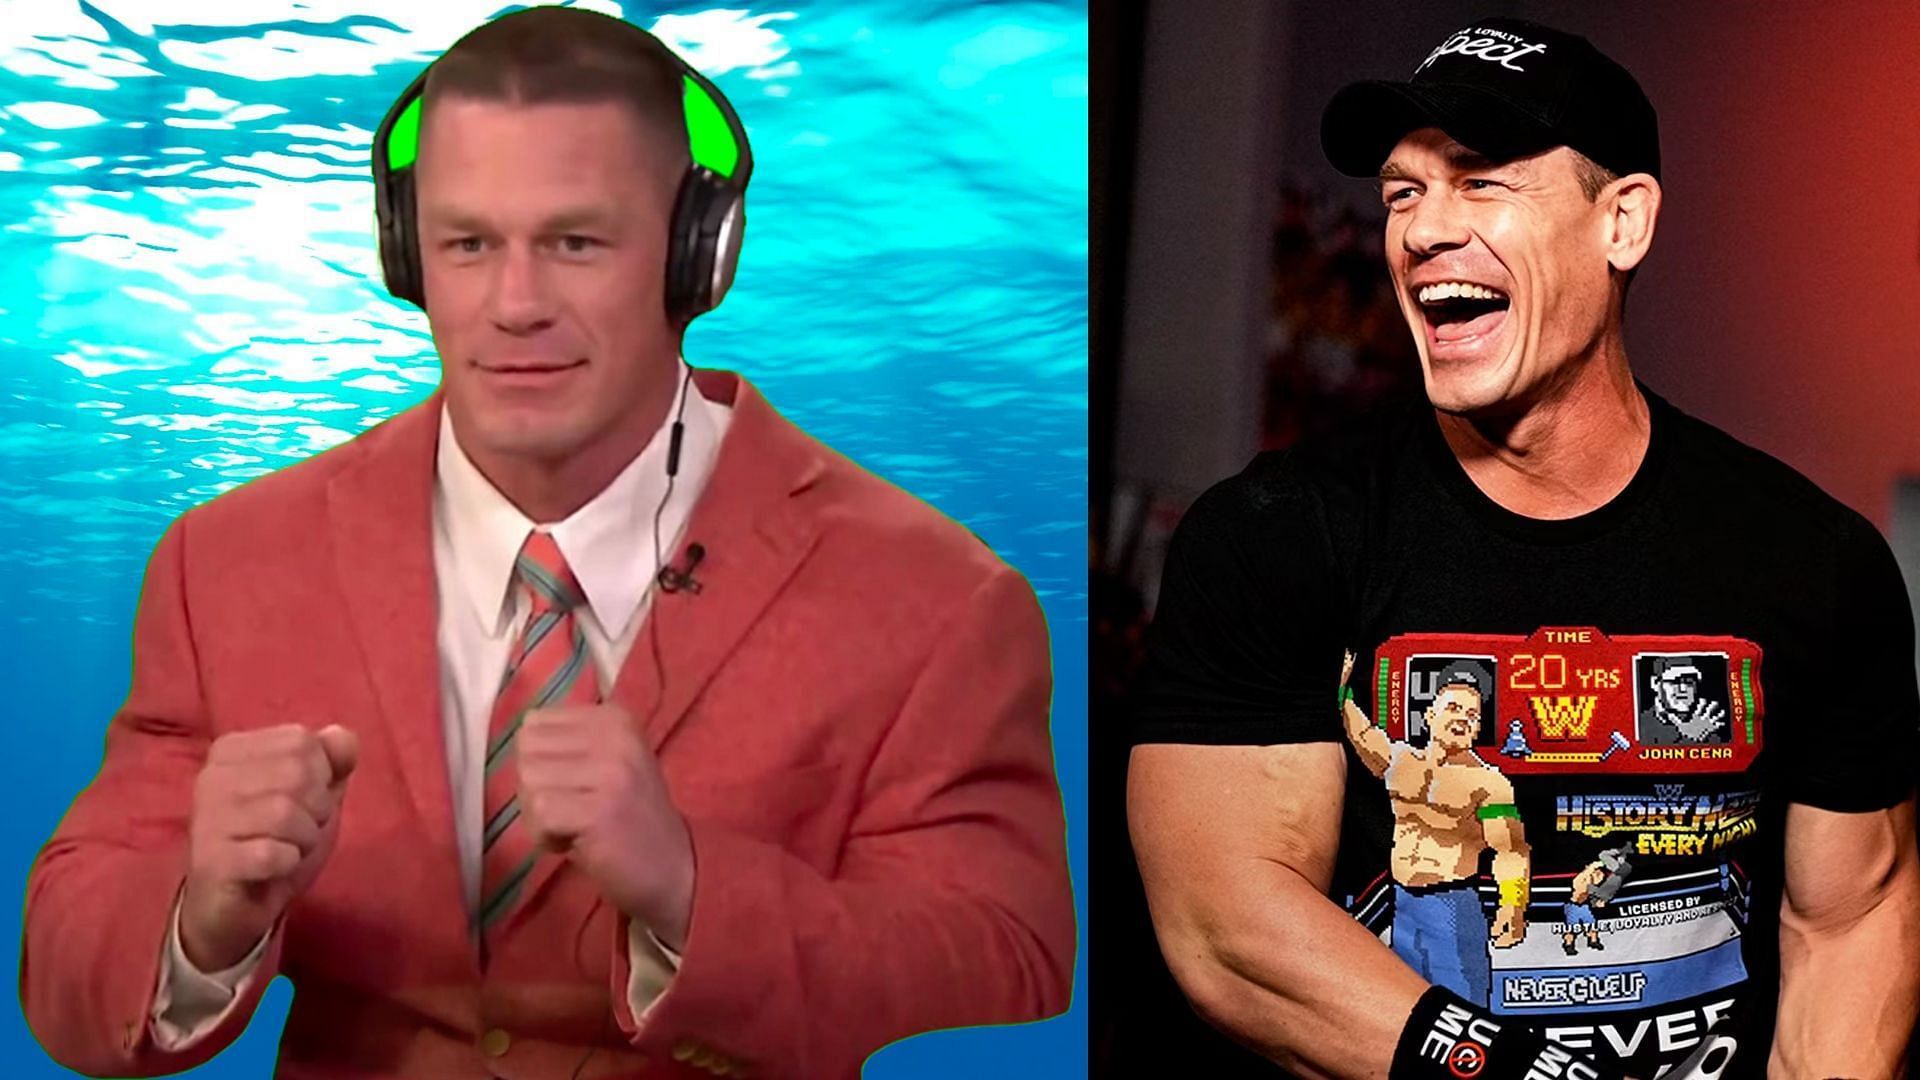 John Cena last appearance in WWE was during WrestleMania 39